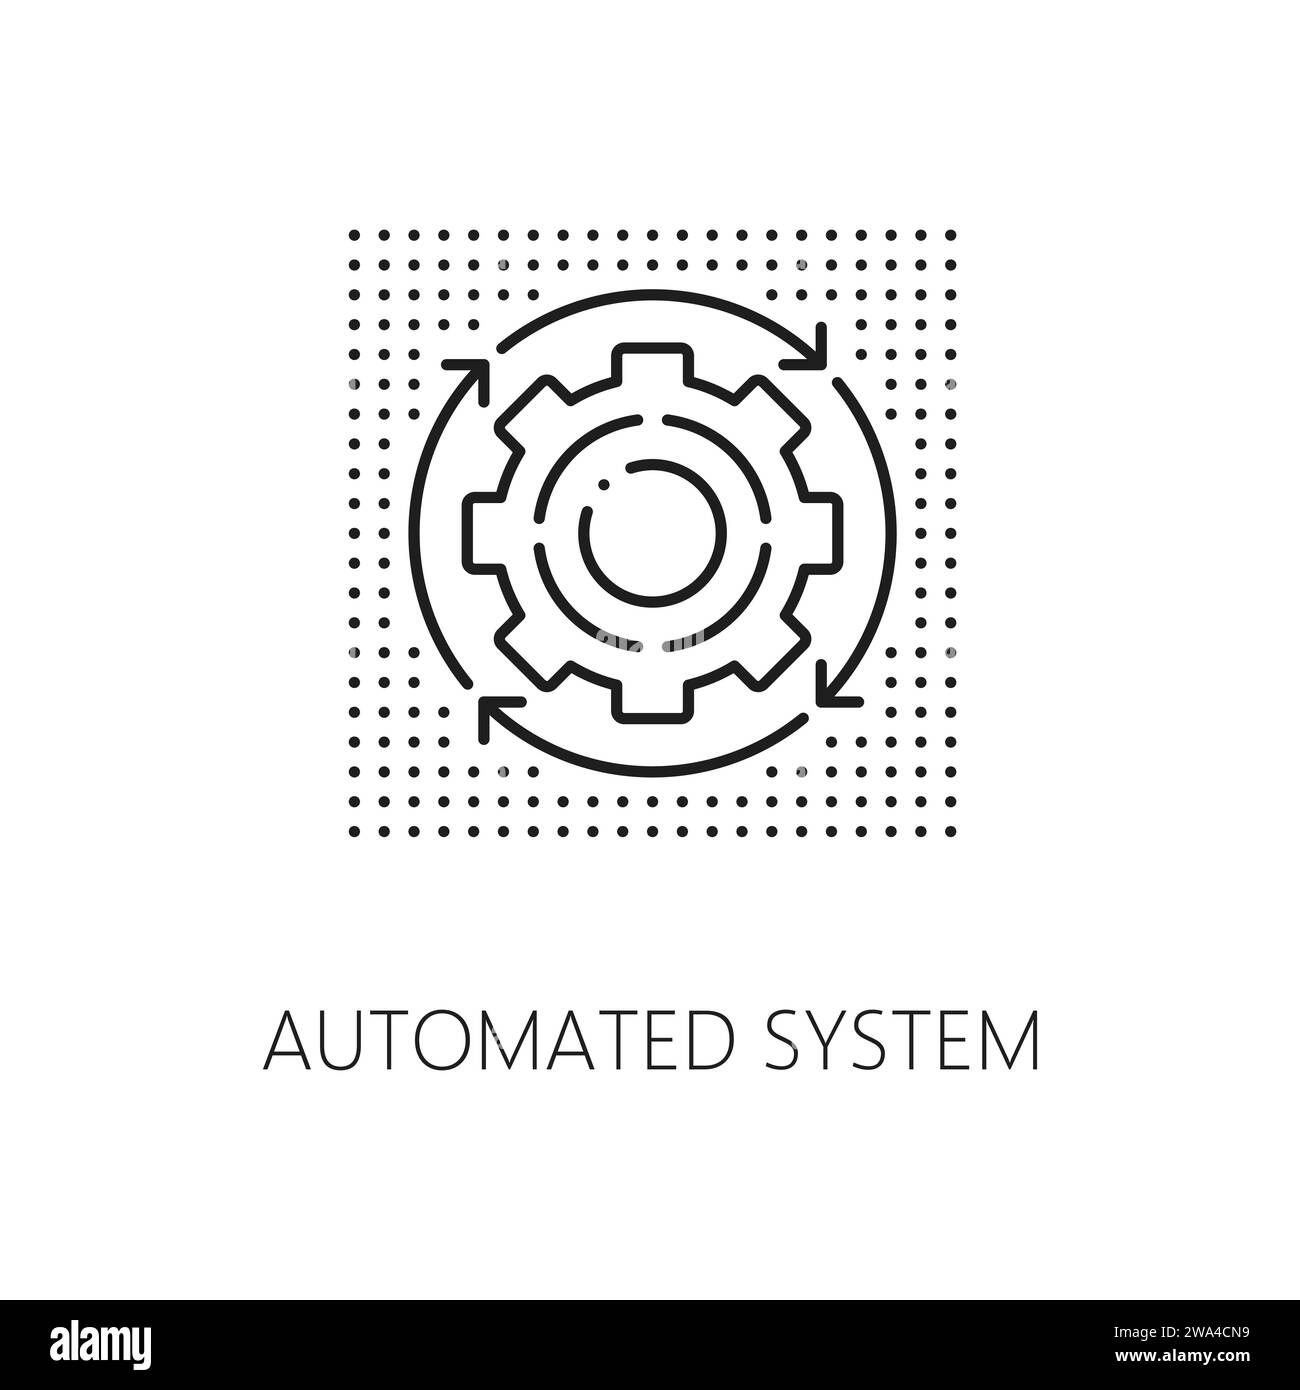 Automated system outline icon, features rotating gear, symbolizing efficient, self-operating processes and technology-driven automation, machine learning and ai artifical intelligence algorithm Stock Vector